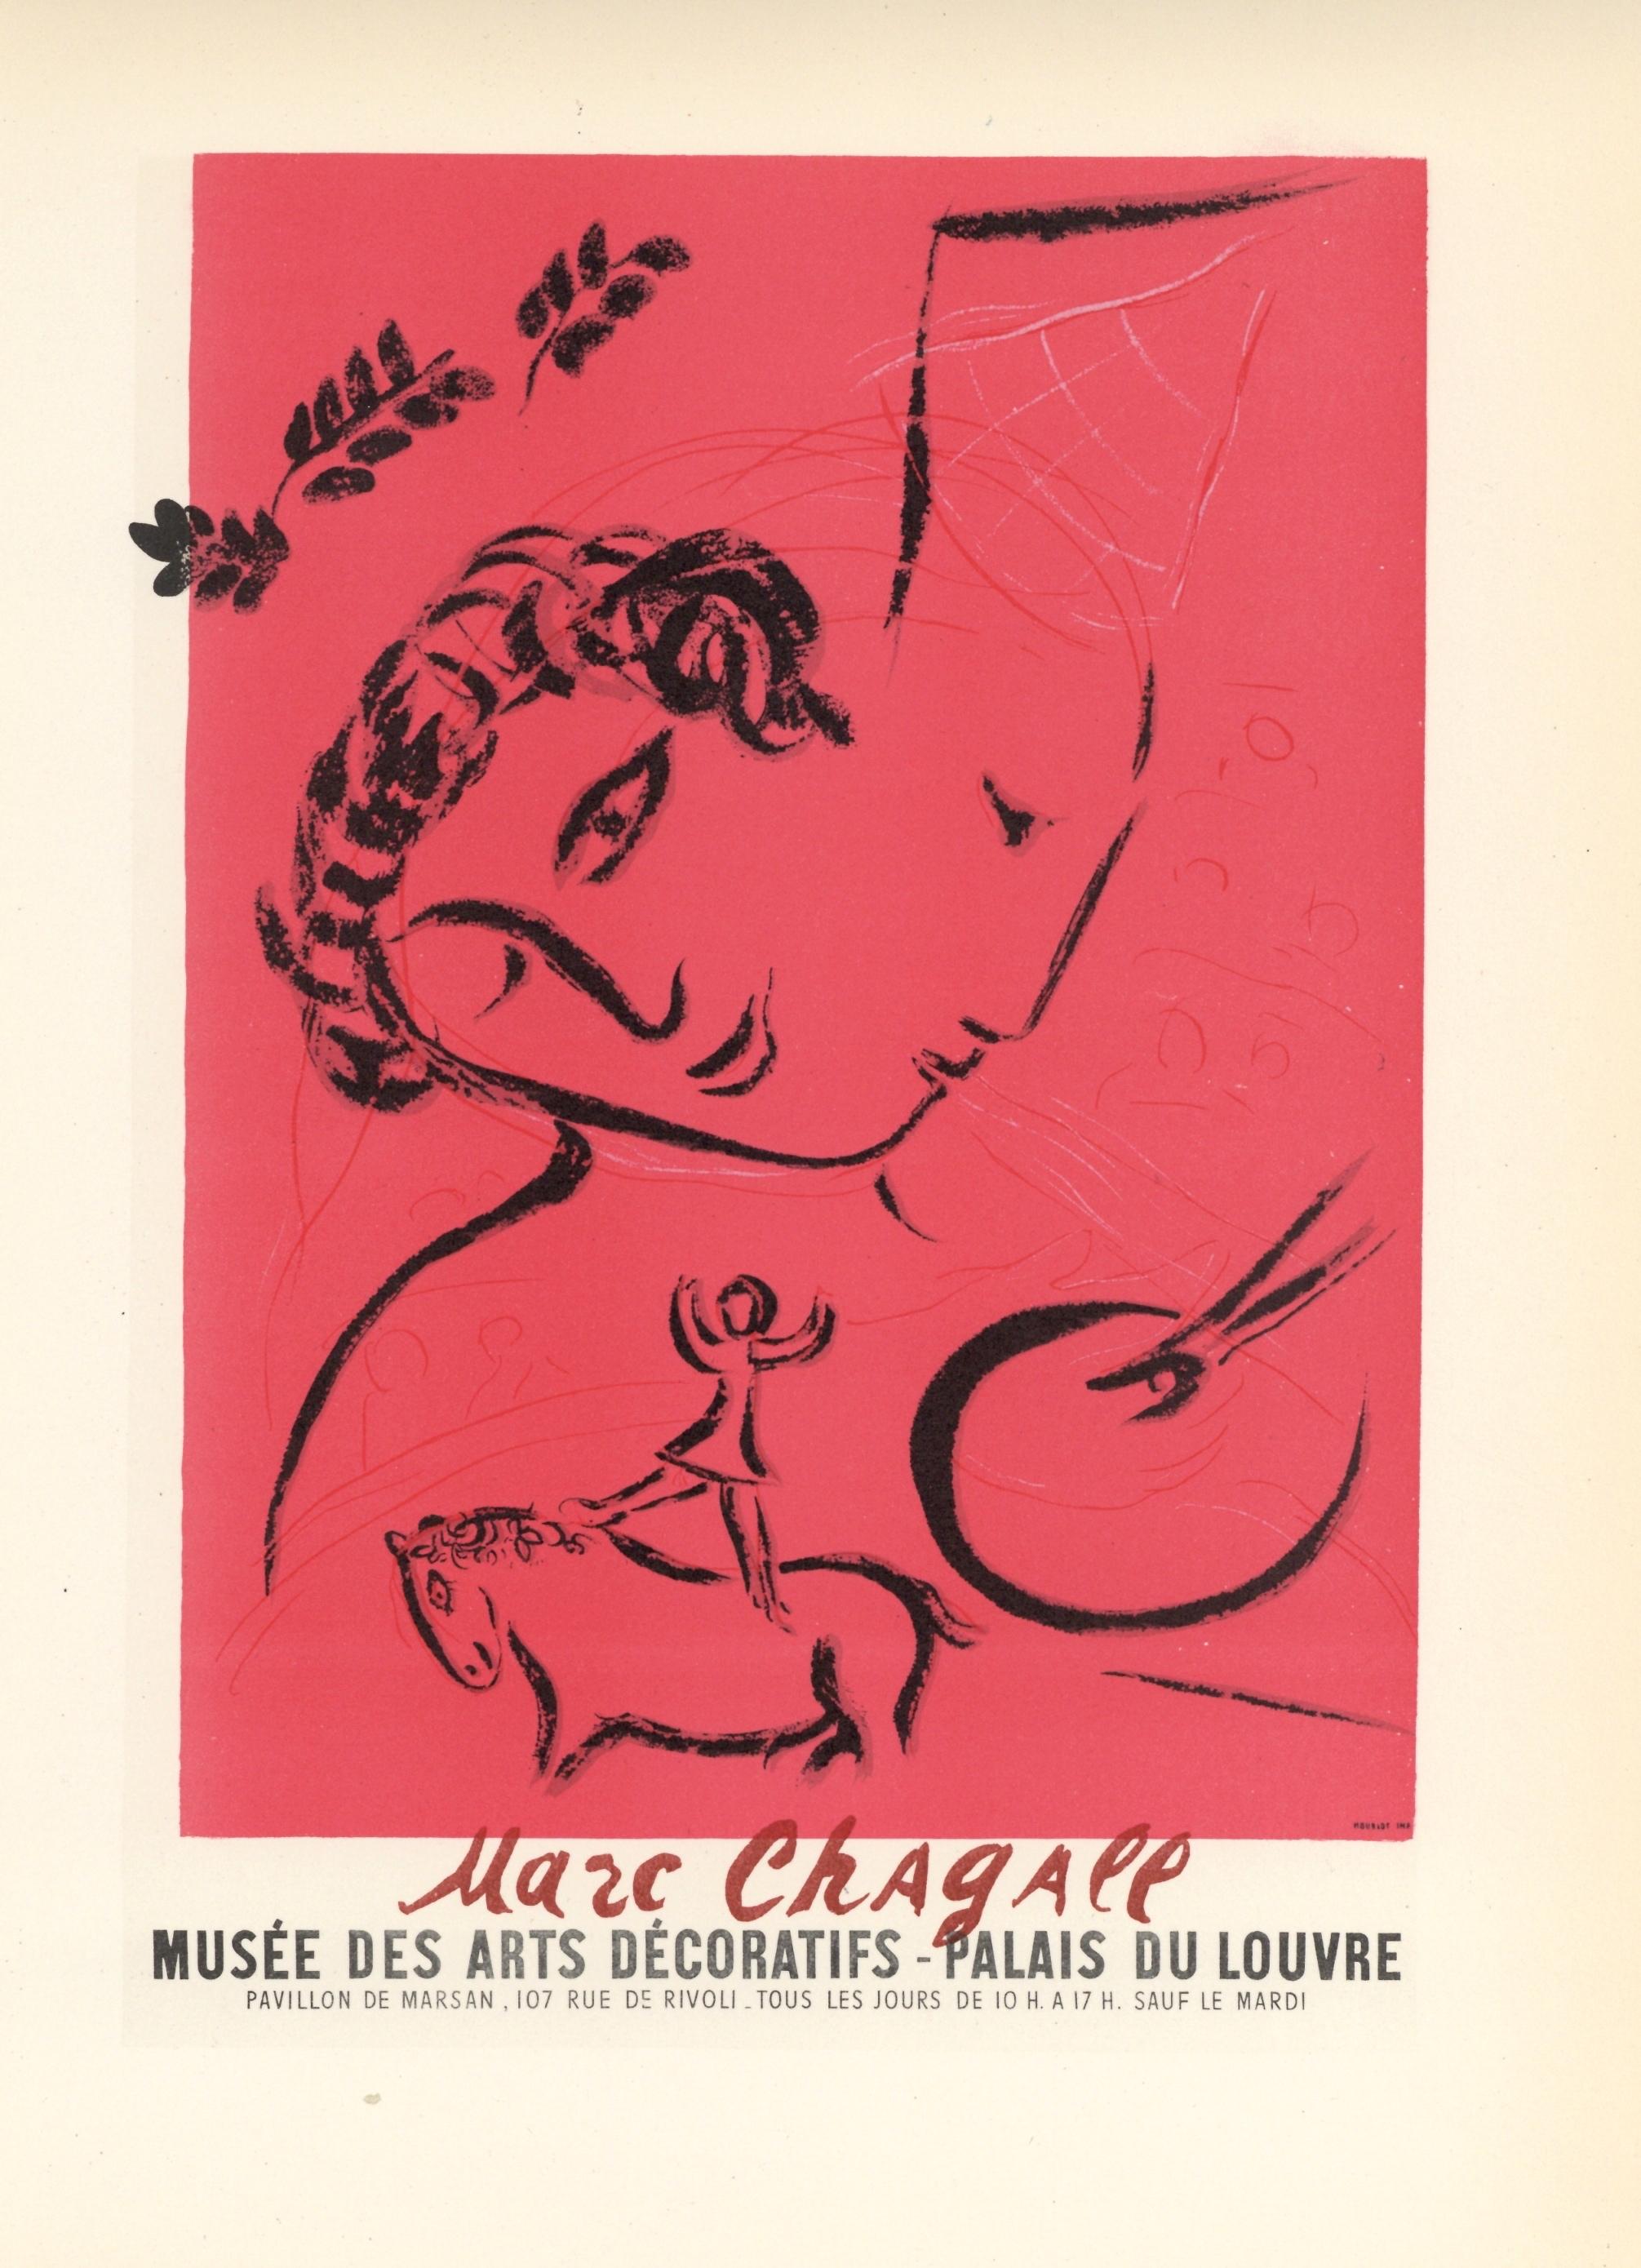 lithograph poster - Print by (after) Marc Chagall